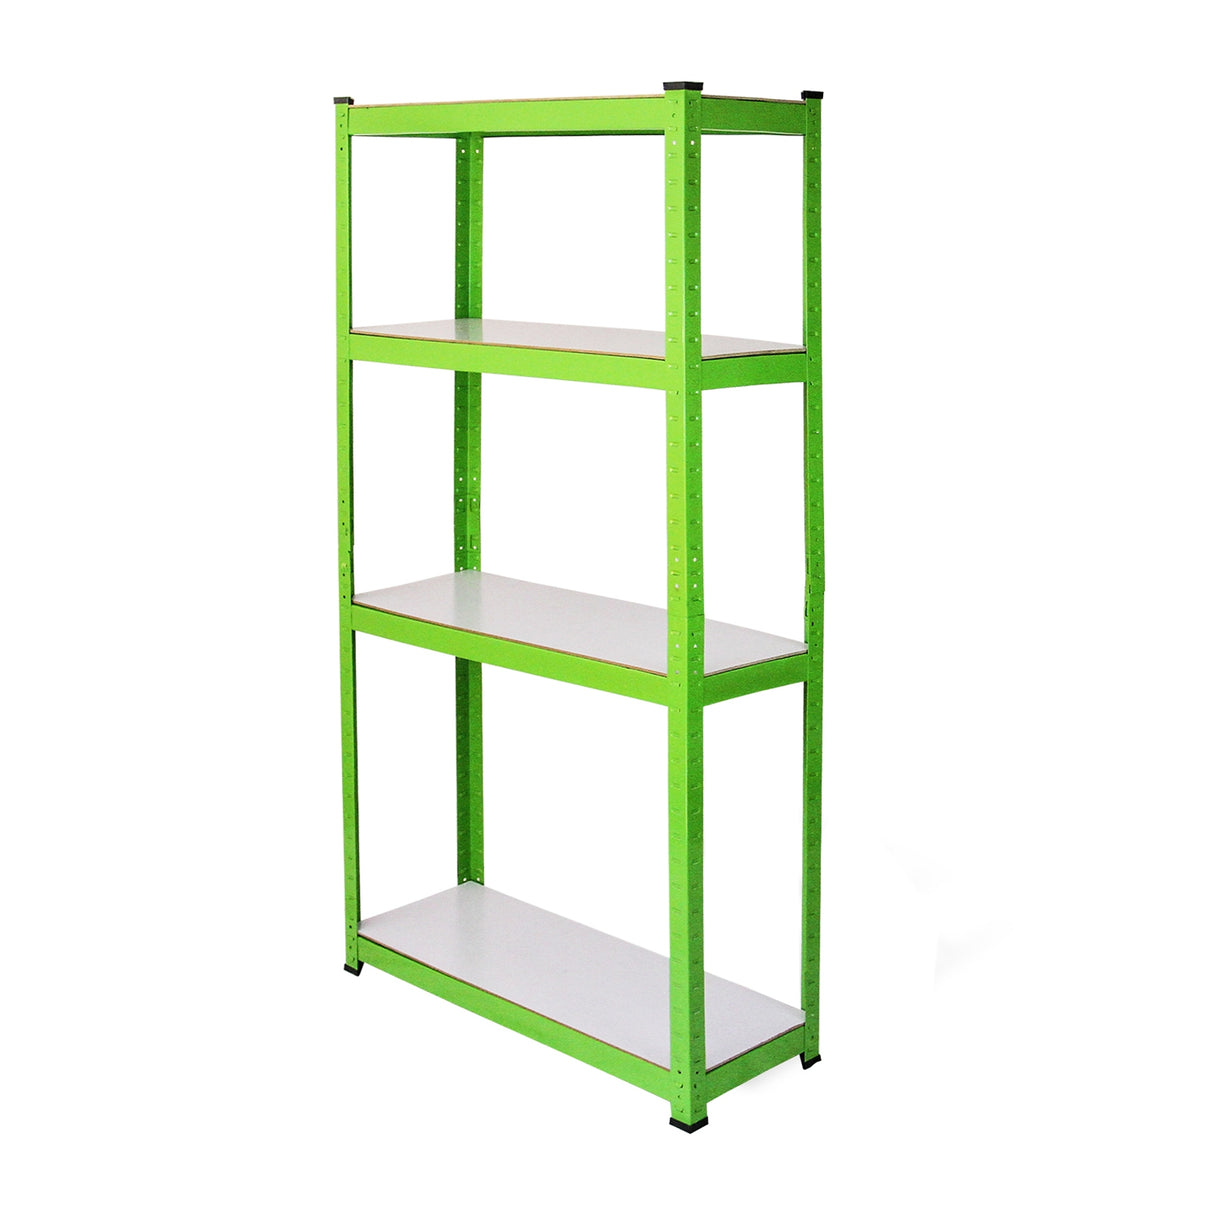 Greenhouse 6ft x 4ft (Green) & Racking